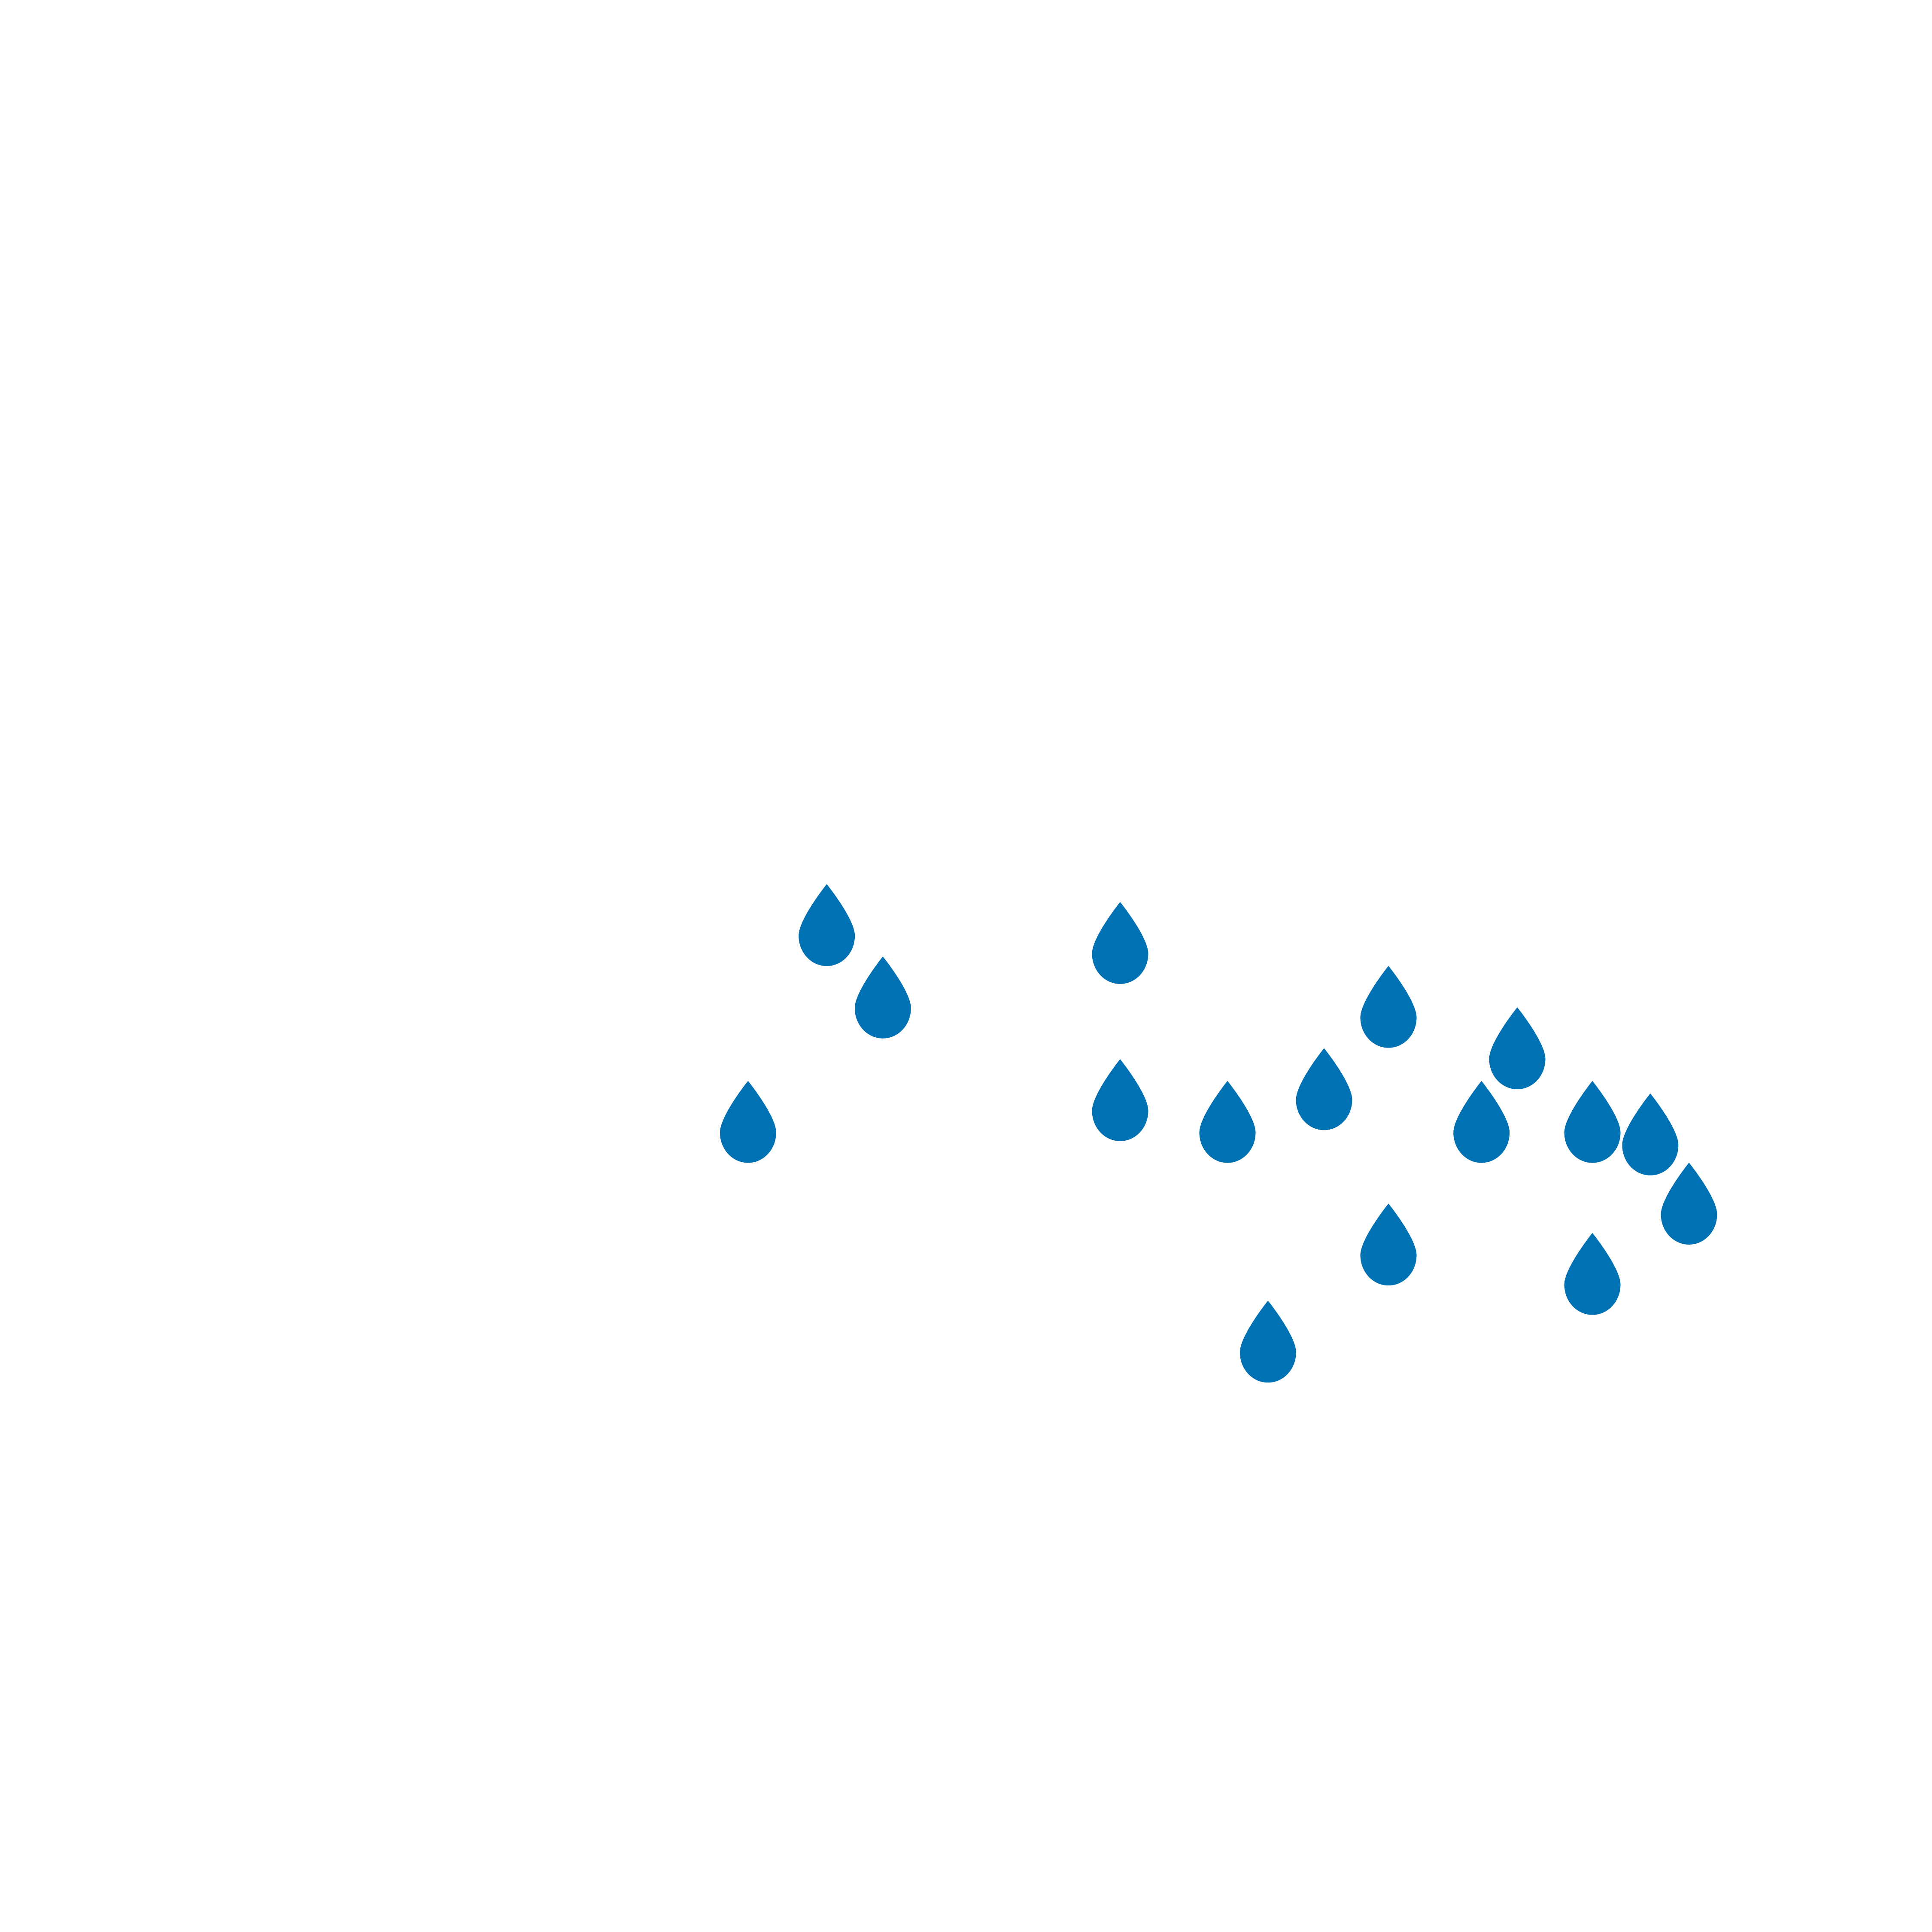 A map of LA county with water droplets falling onto the map to represent the replenishment of LA county groundwater basins 